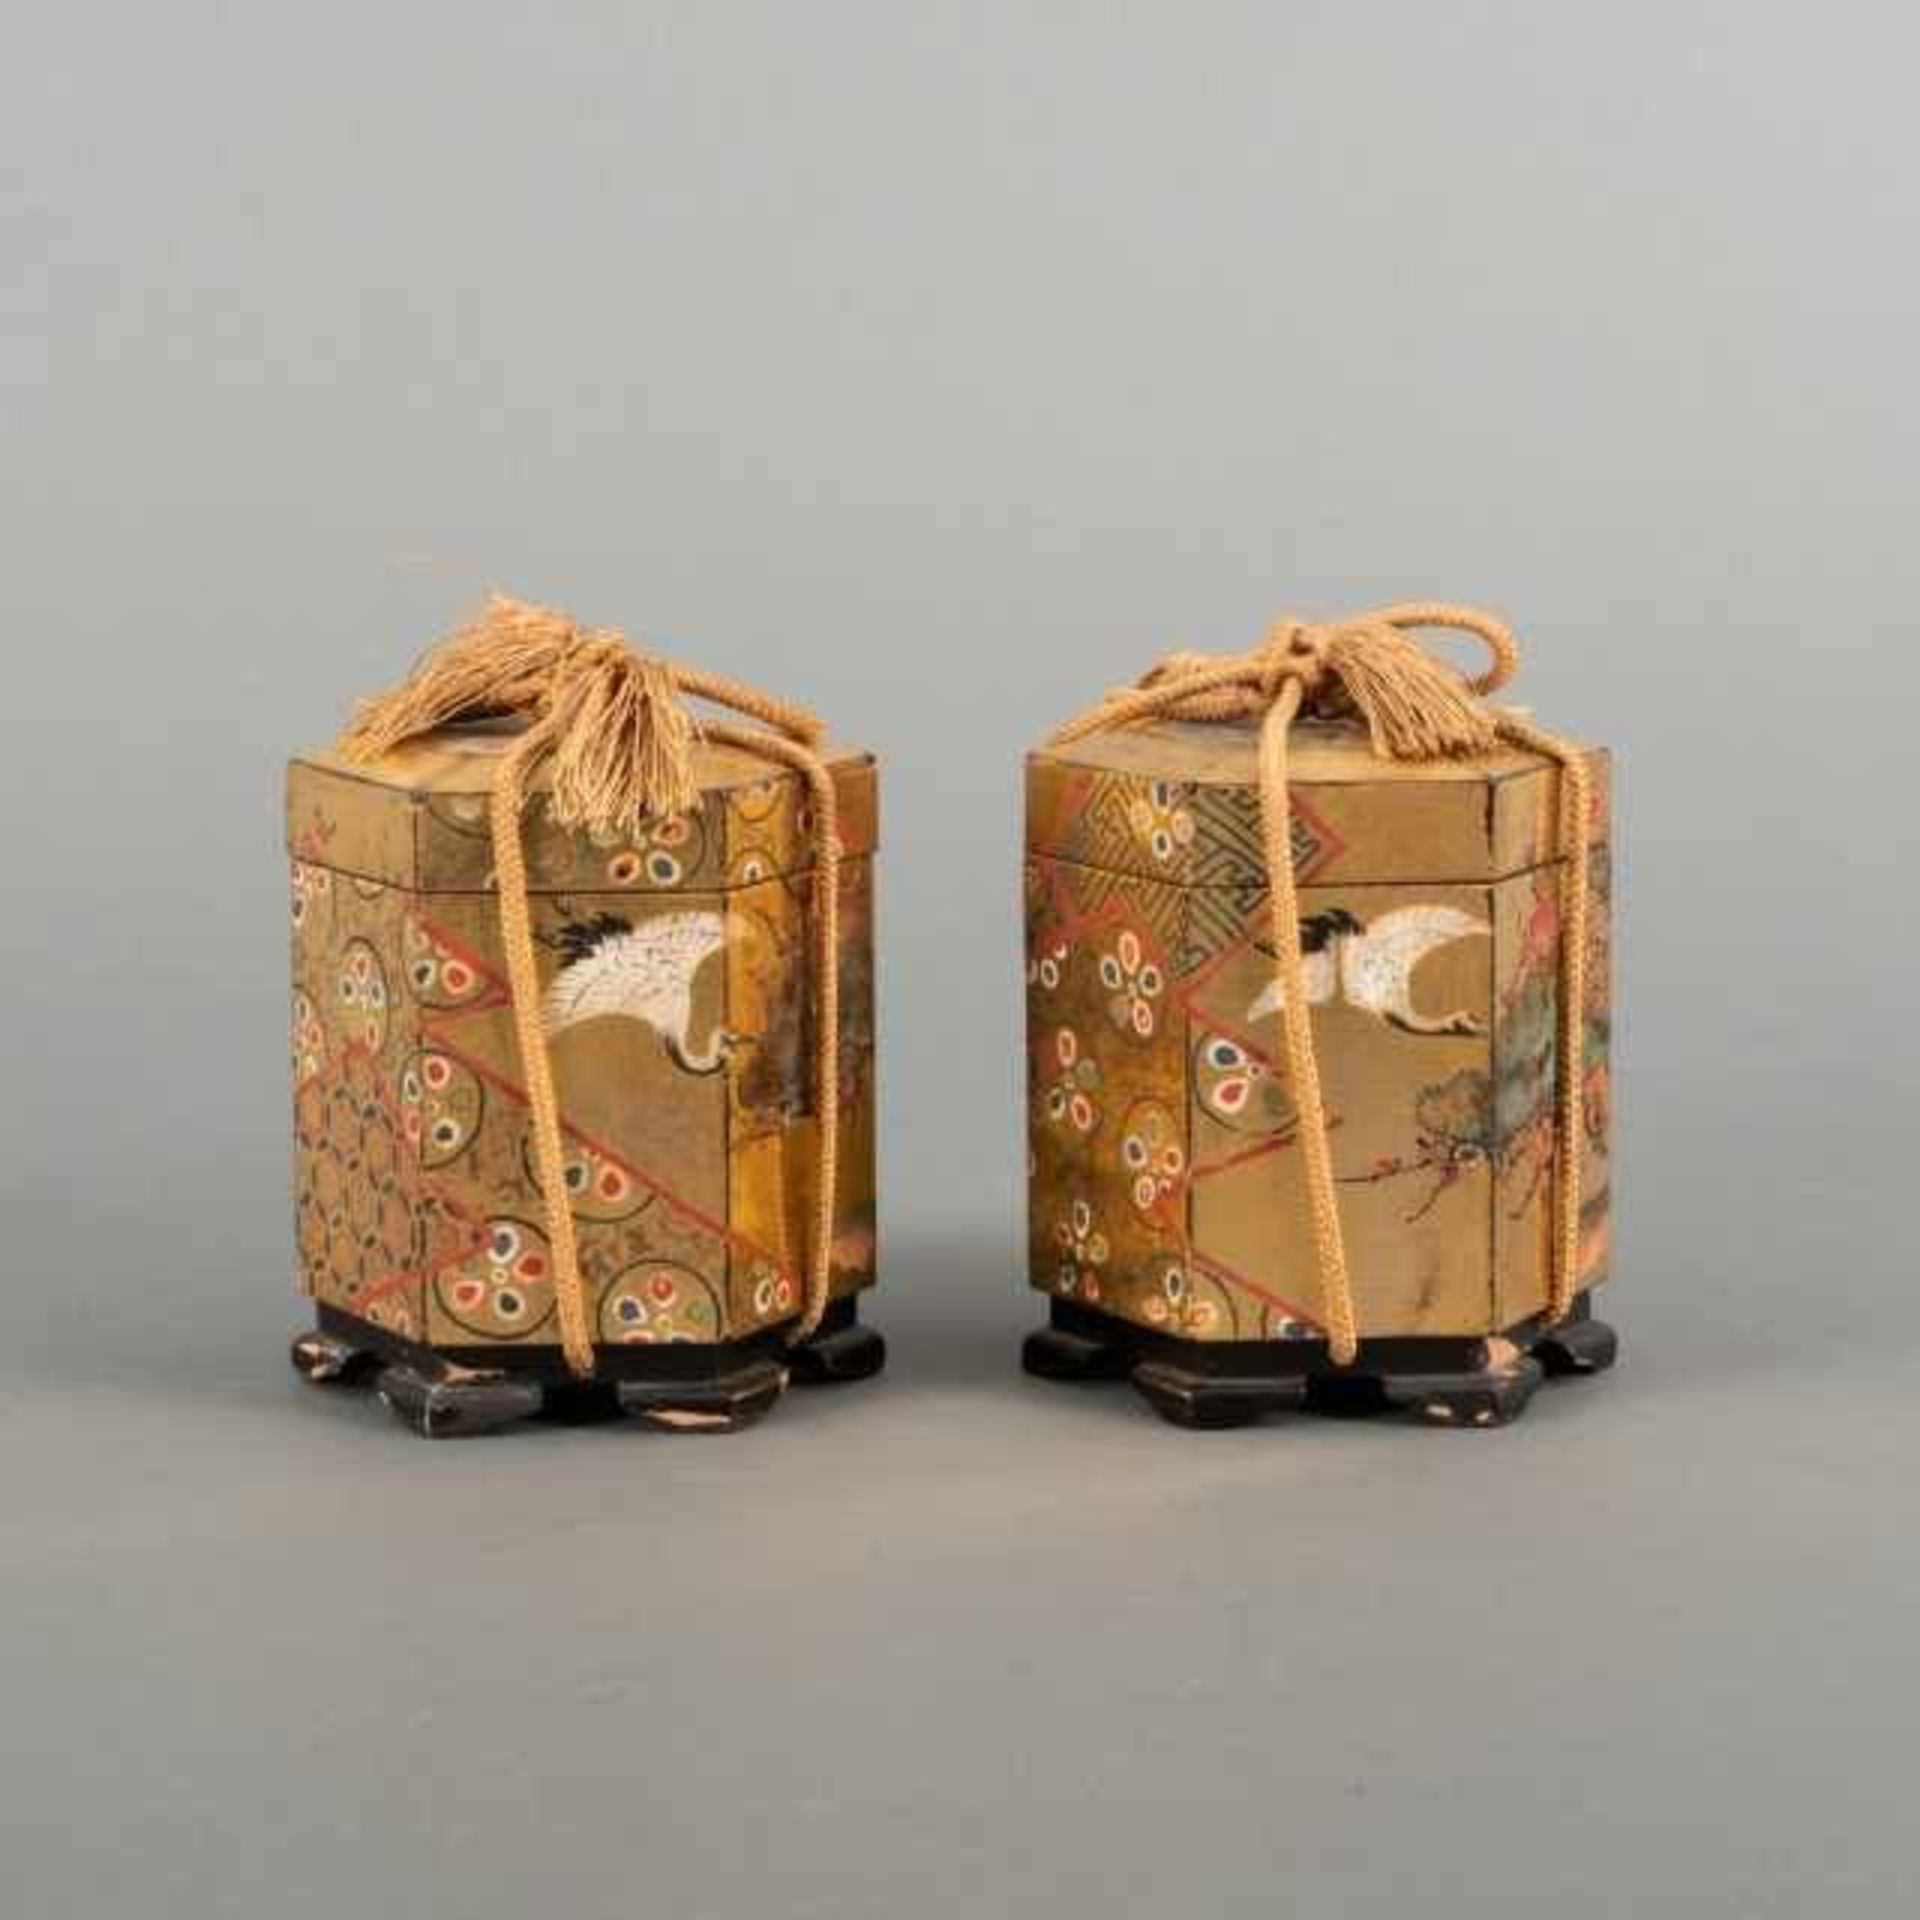 Pair of golden lacquer kaioke, or shell boxes, with polychrome painted motif of cranes and sakura